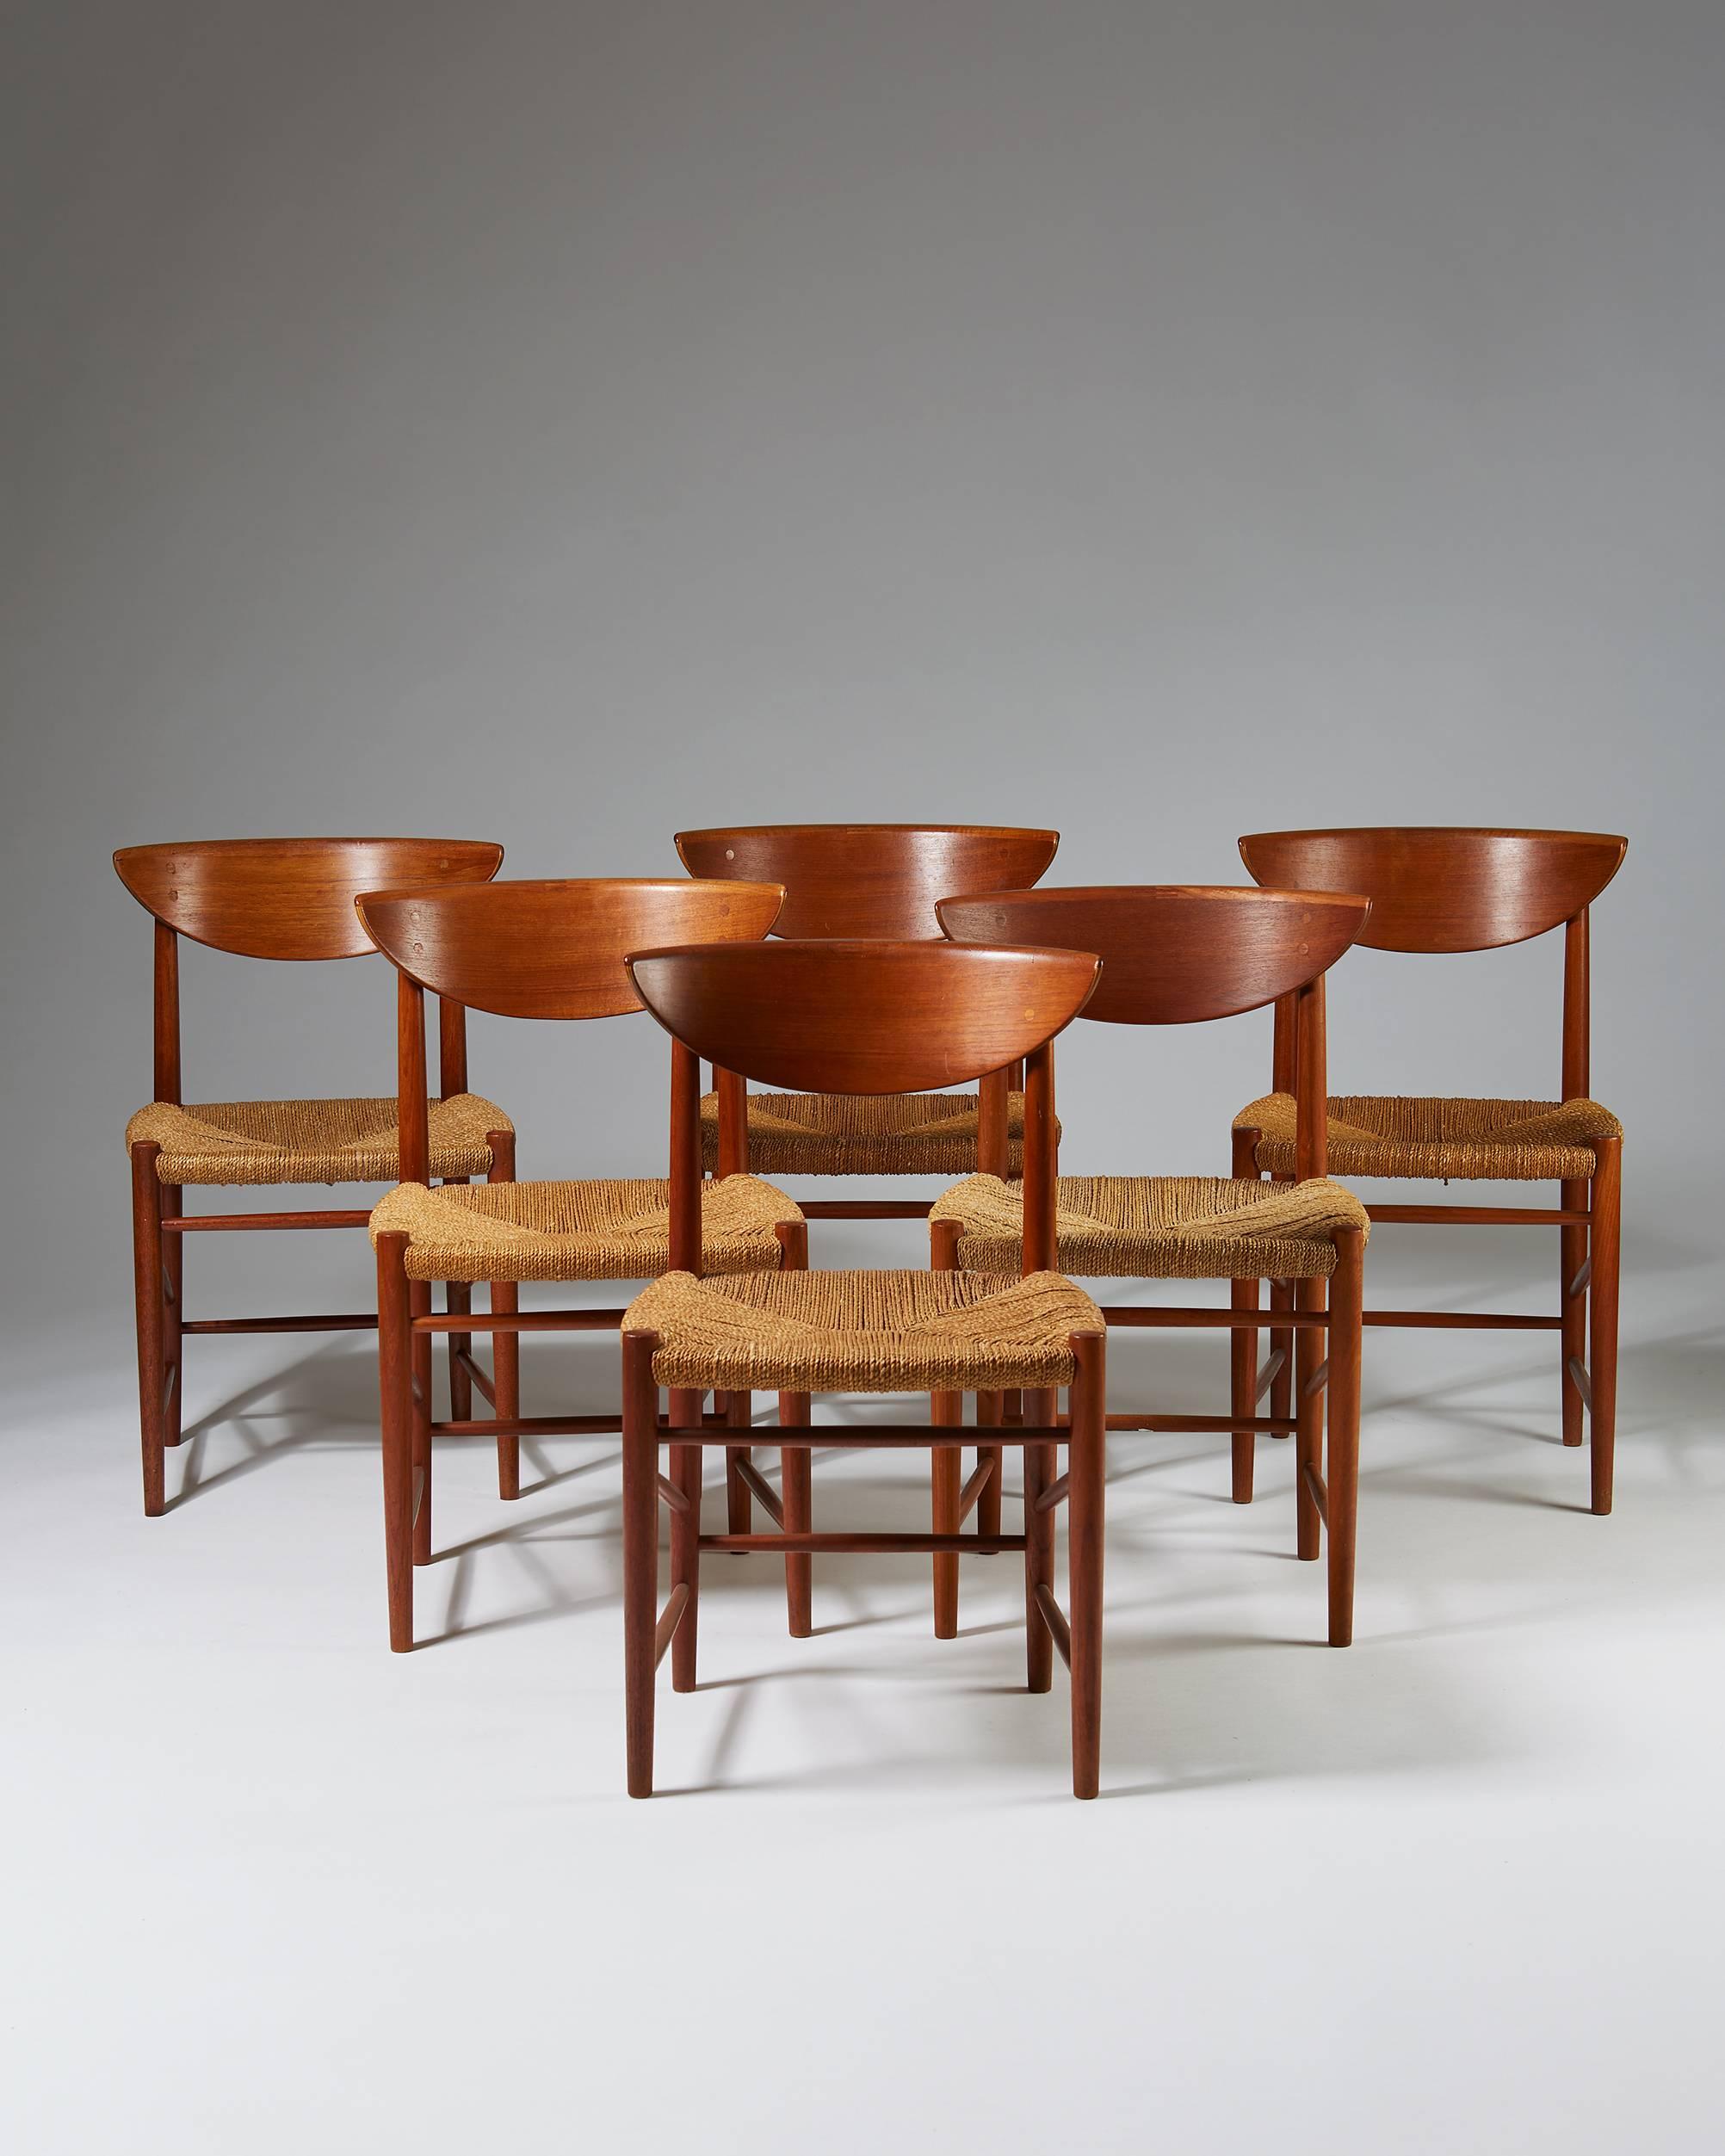 Set of six dining chairs designed by Peter Hvidt and Orla Möllgaard Nielsen for Söborg,
Denmark, 1950s.
Teak and sea grass.

Measures: H 77 cm/ 30 1/4''
W 45 cm/ 17 3/4''
D 42 cm/ 16 1/2''
Set height 43 cm/ 17''.